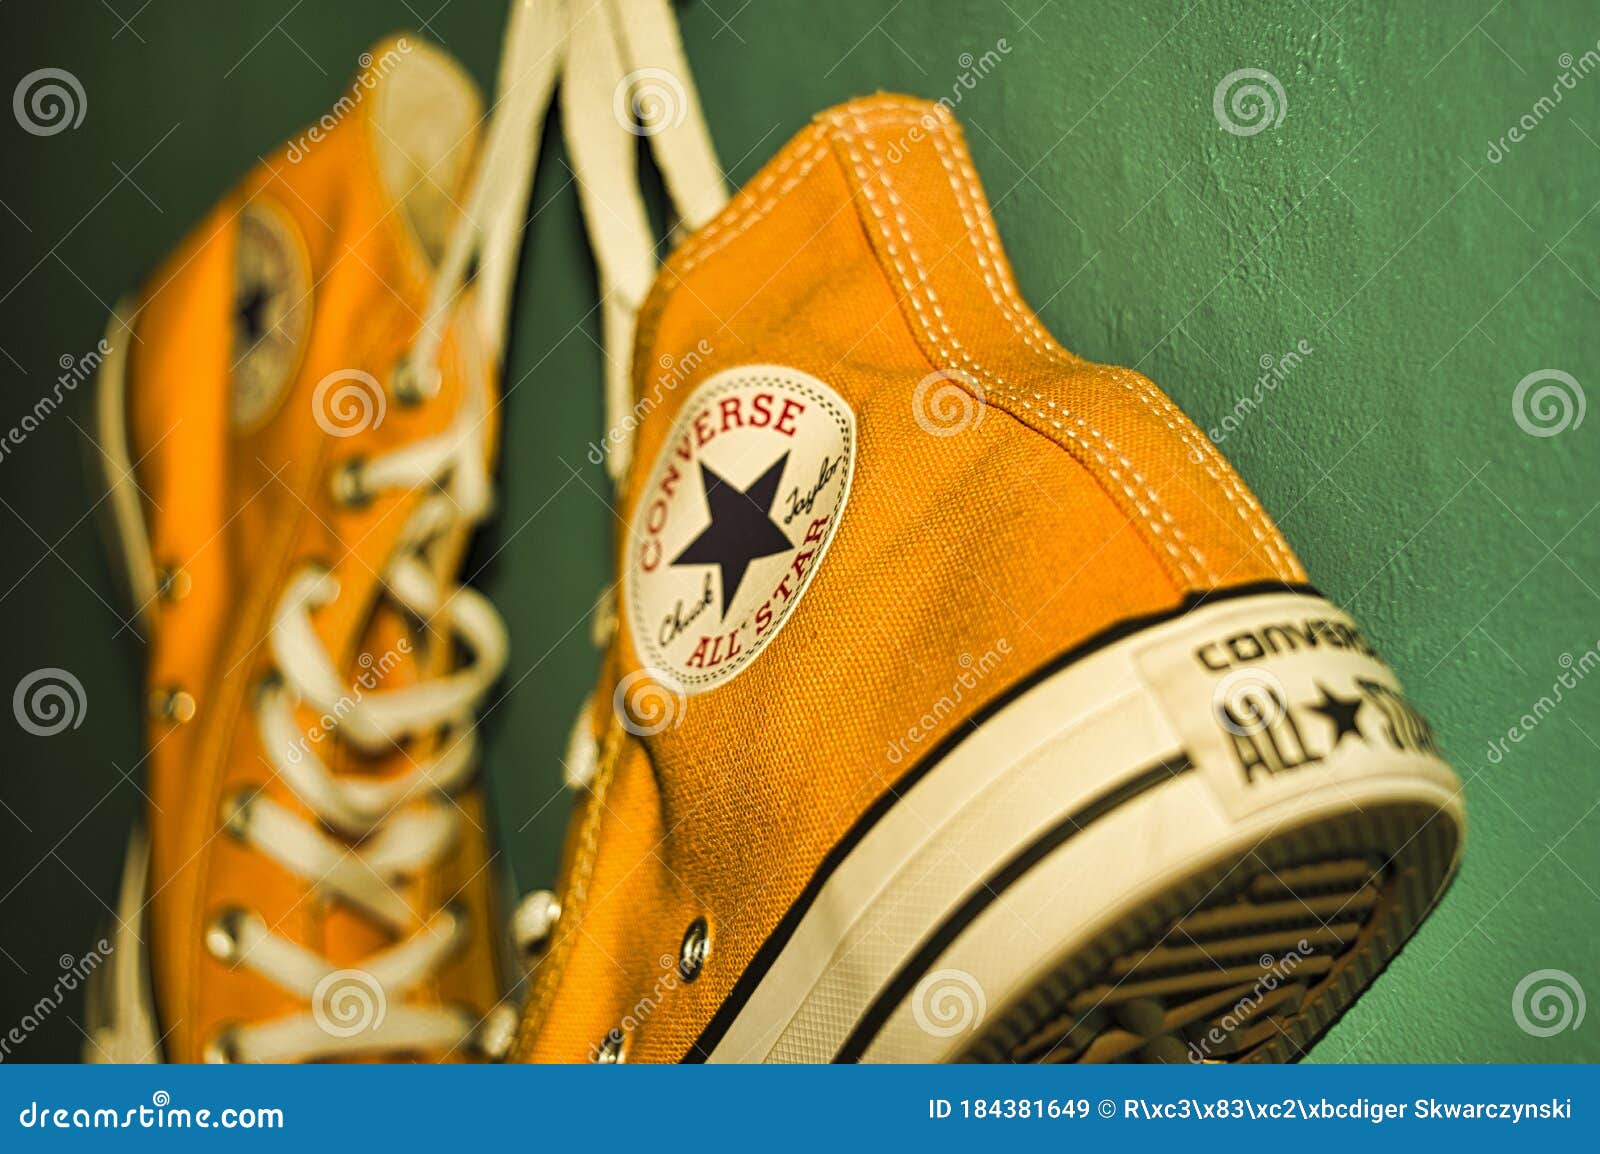 Converse All Star Chuck Taylor Hannover Germany November 18 Sneakers In Orange Ray On A Petrol Green Background Editorial Stock Image Image Of Detailsn Lifestyle